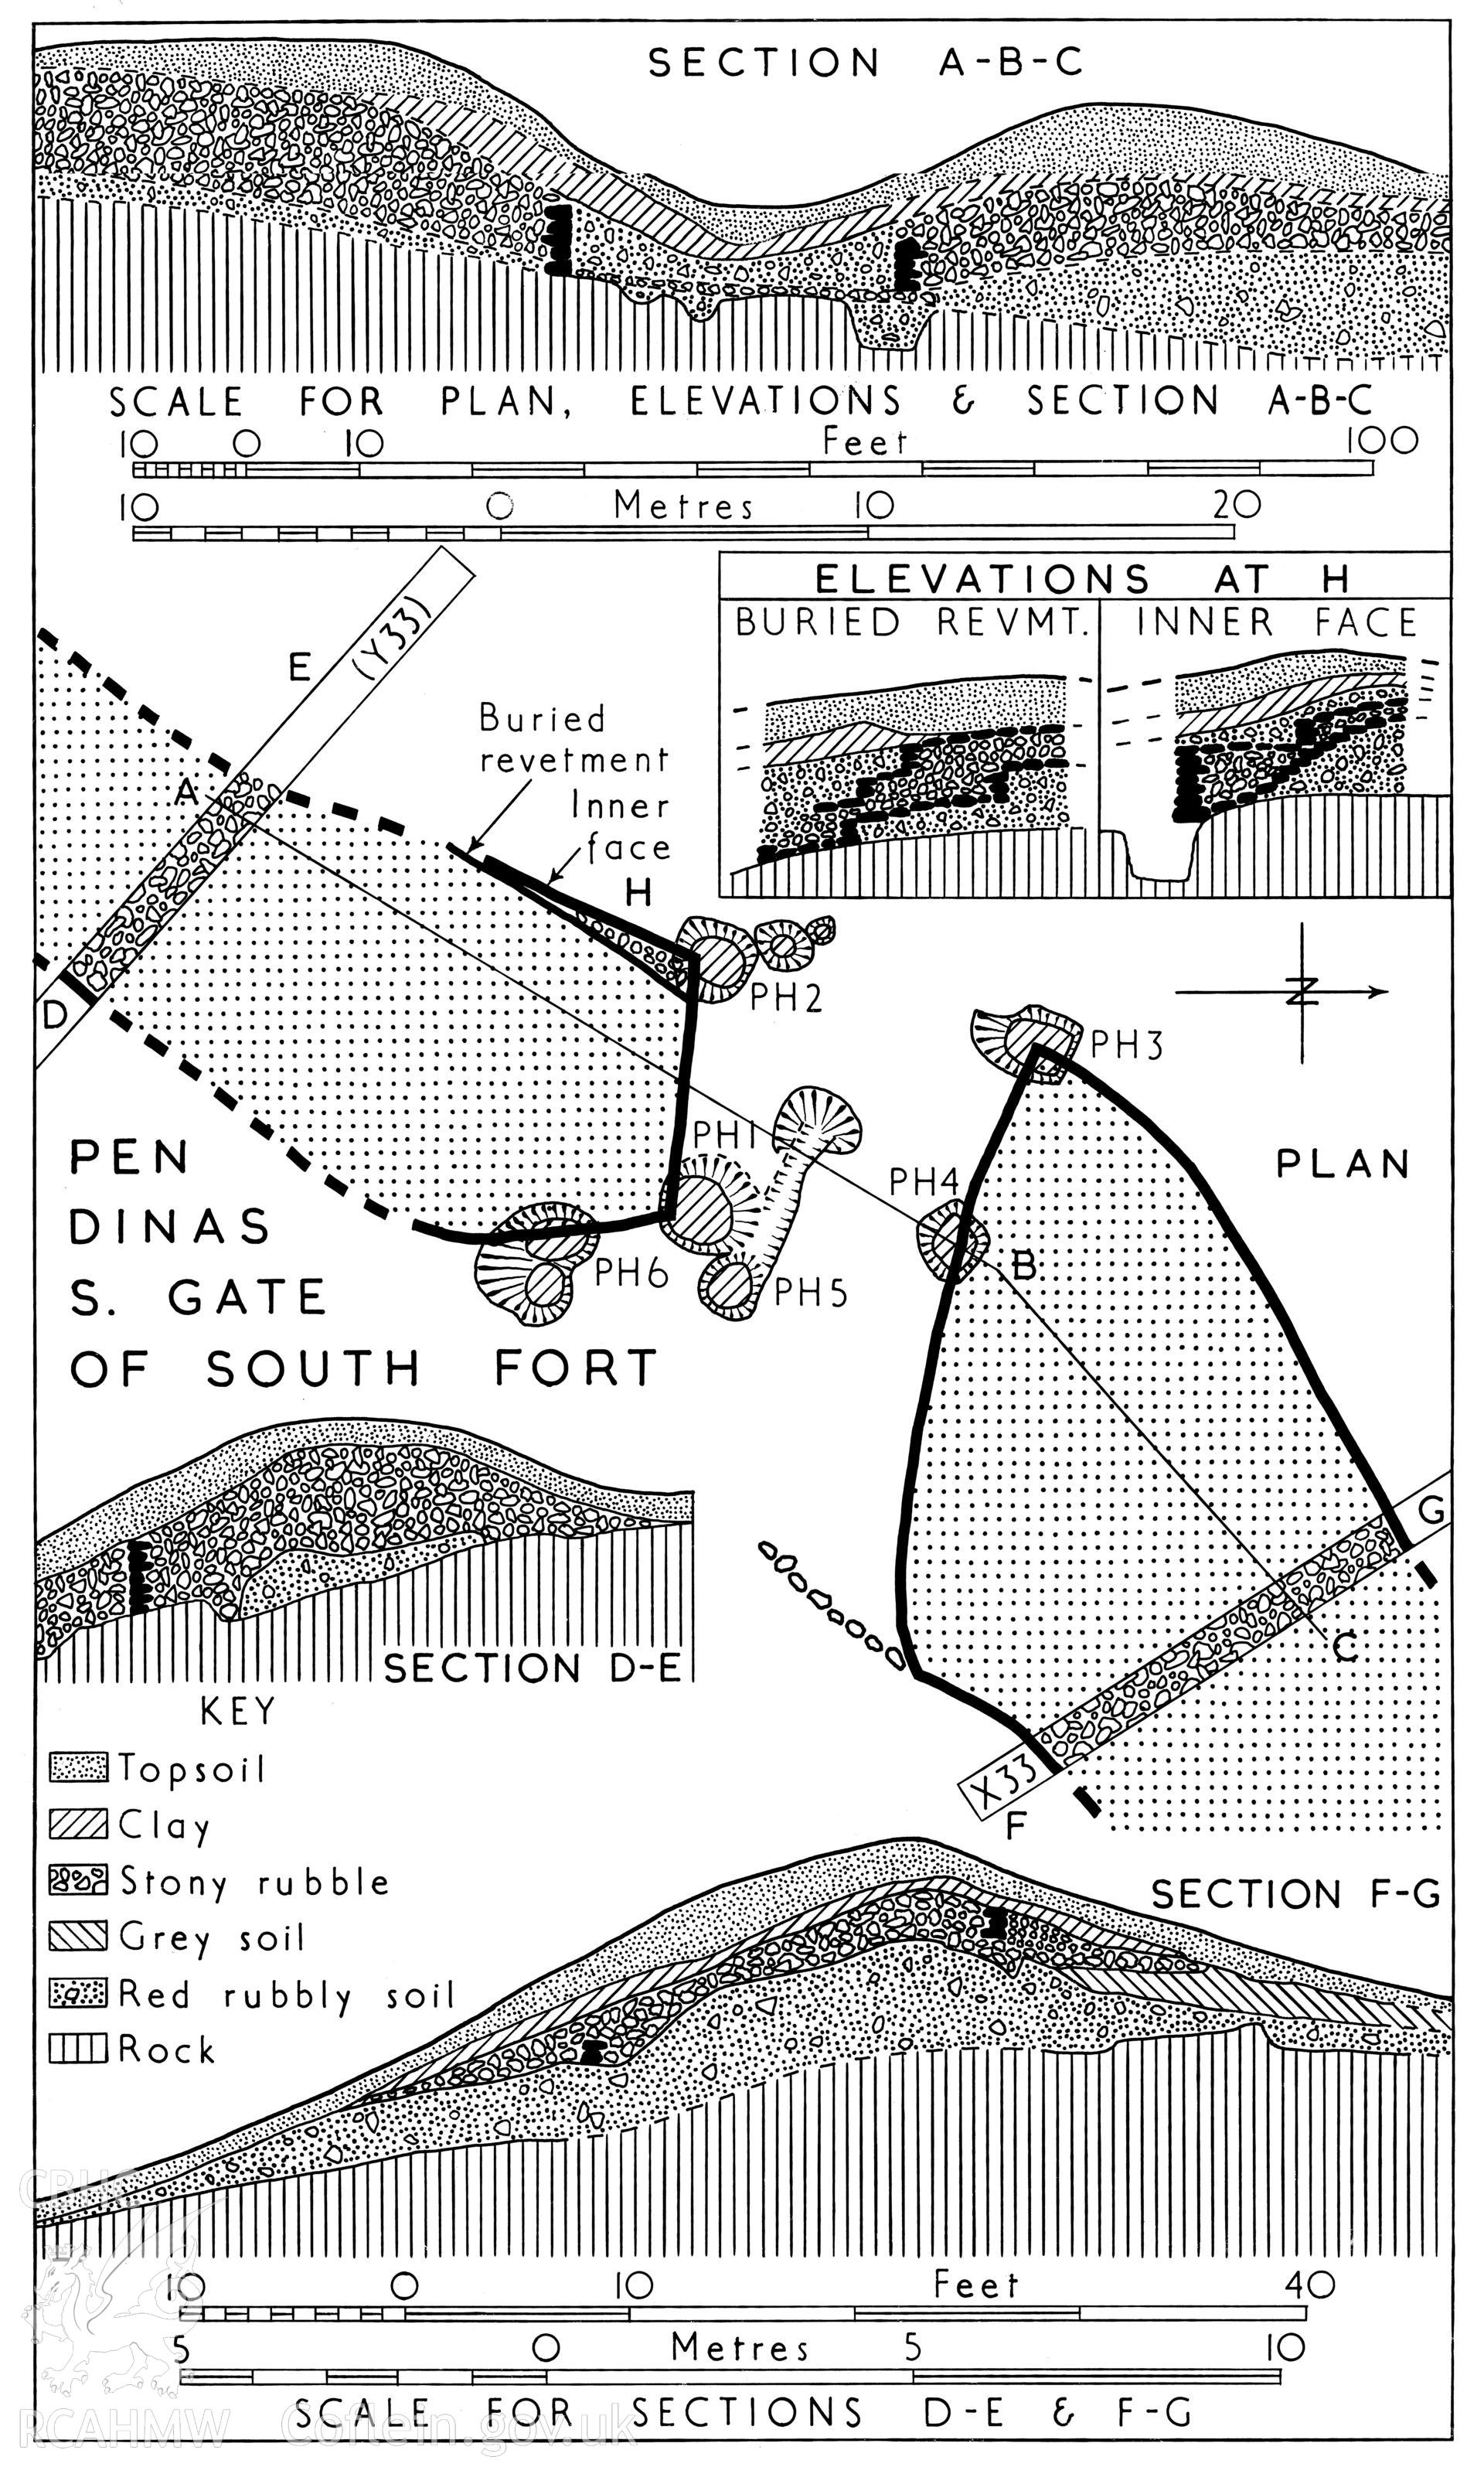 RCAHMW drawing (ink on linen) showing plan, elevation and section of the South Gate of the North Fort at Pen Dinas, Aberystwyth.